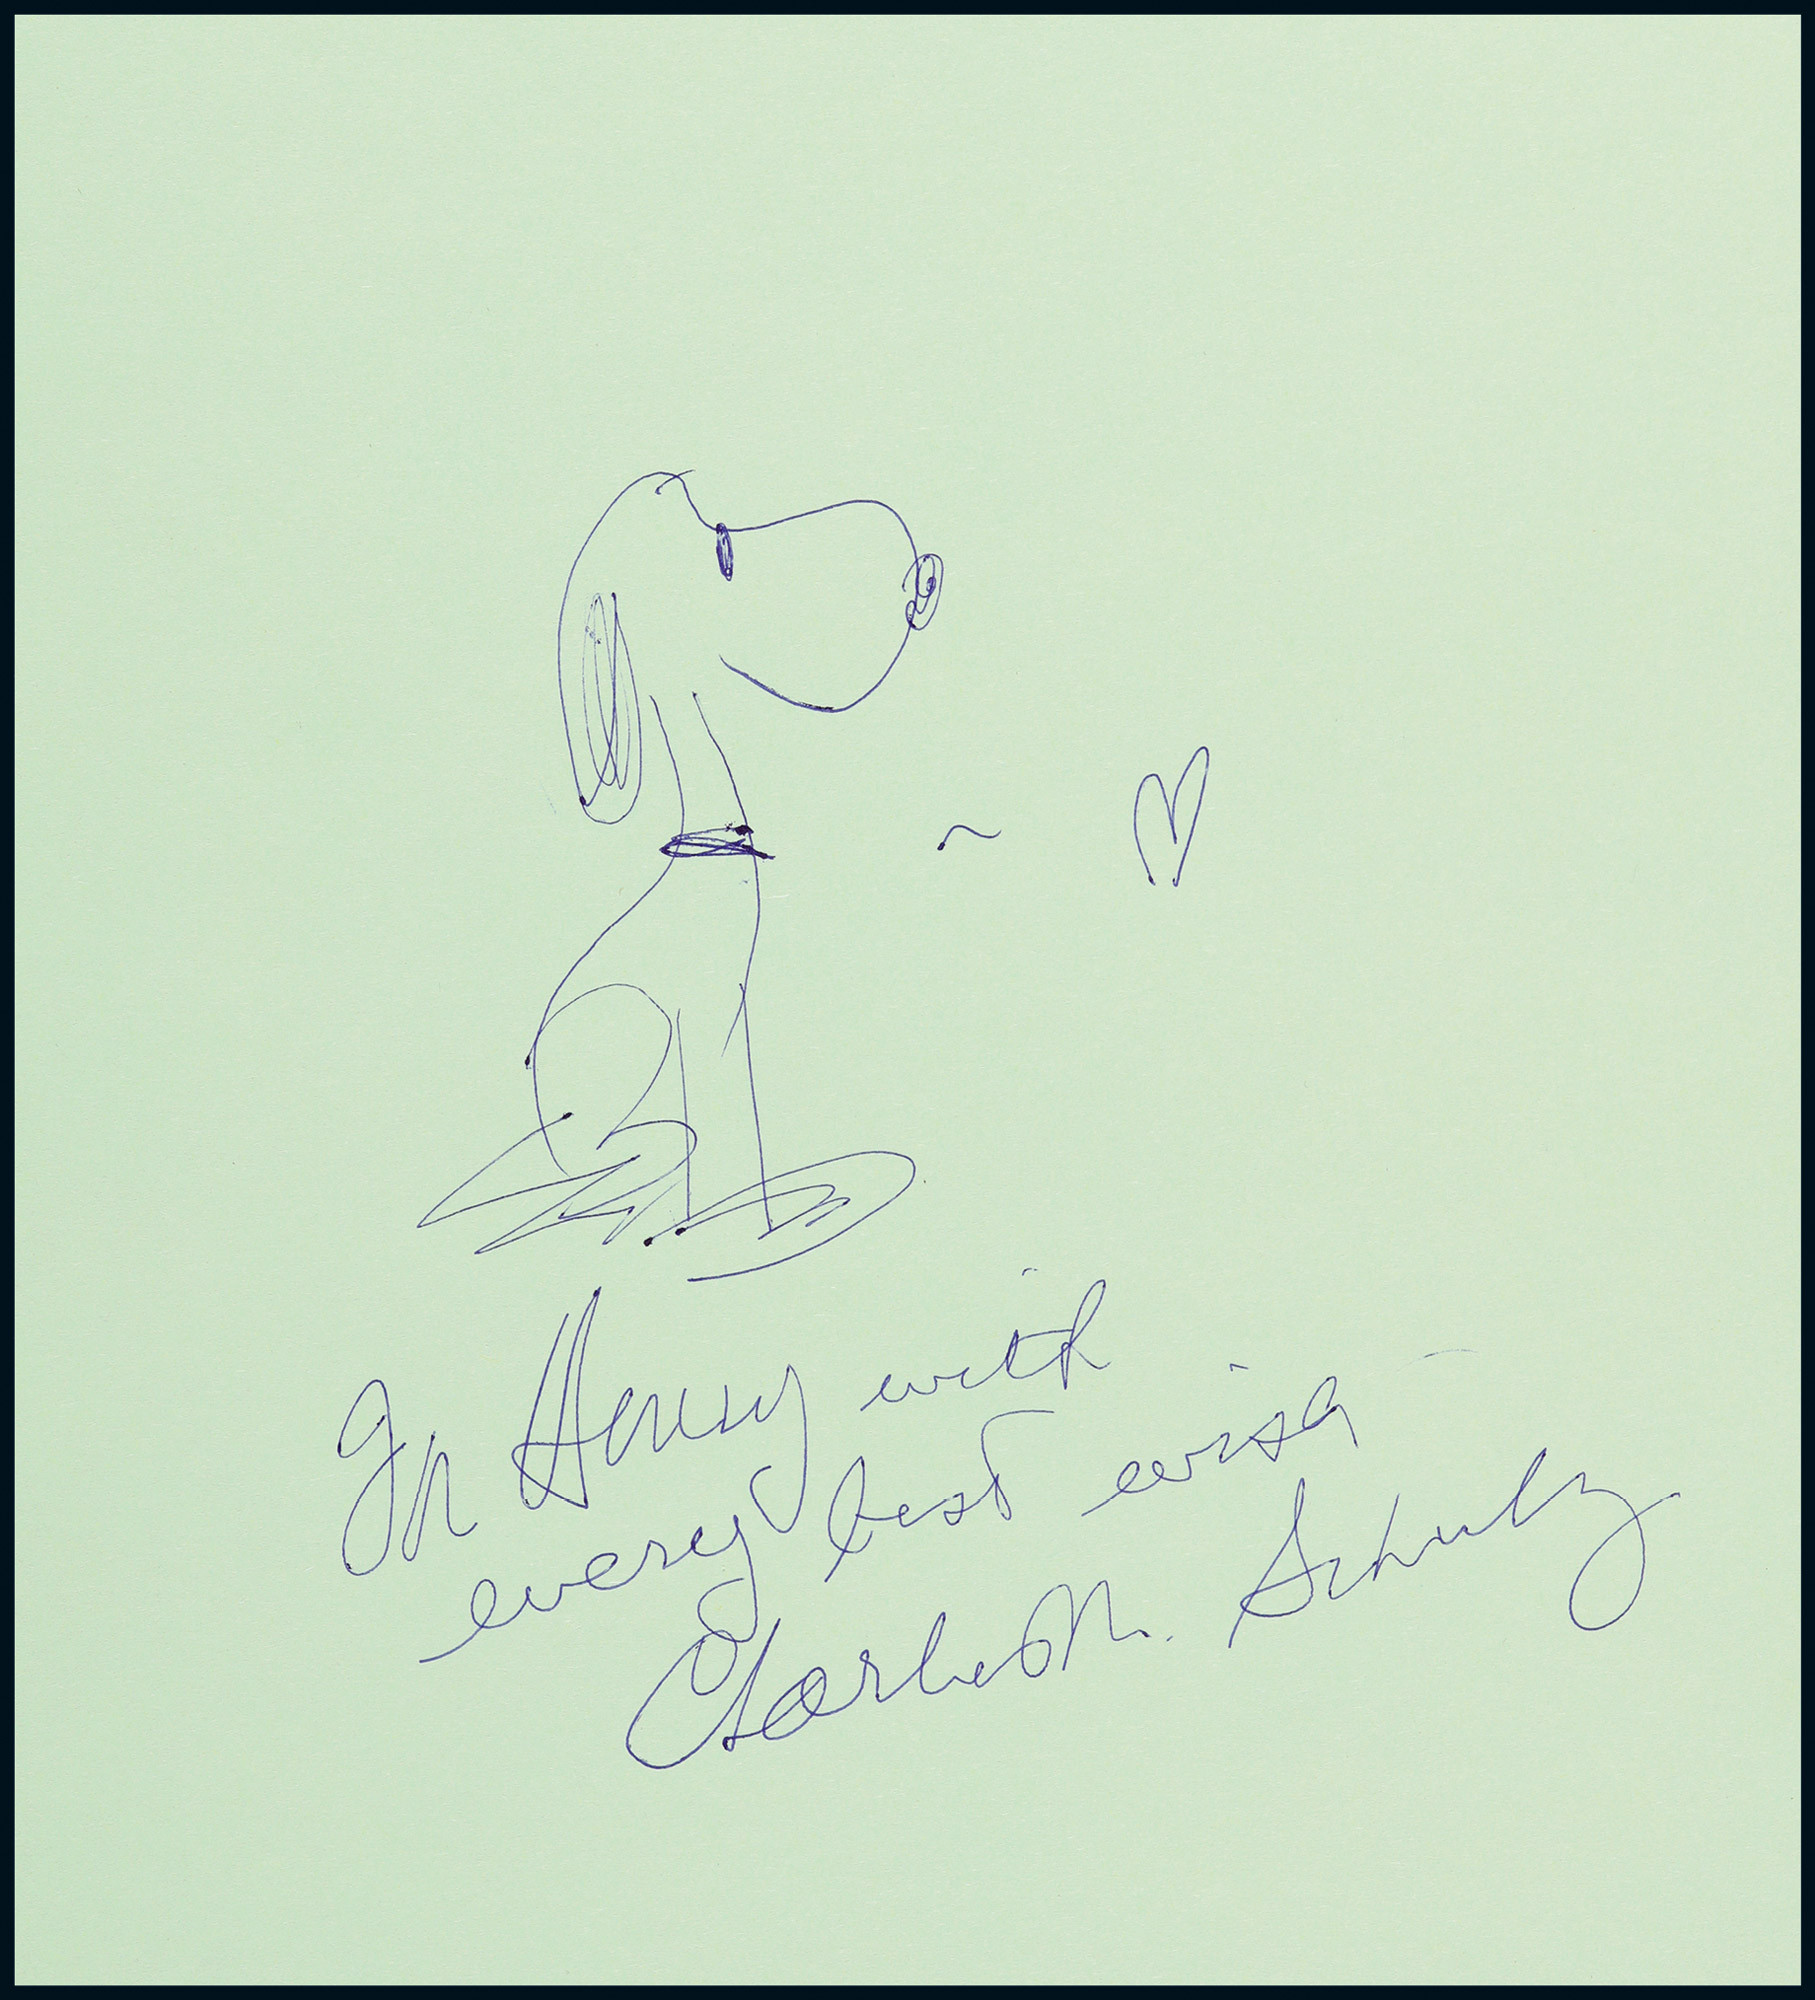 The hand-painted “Snoopy” by Charles M. Schulz, the “Father of Snoopy”, with certificate